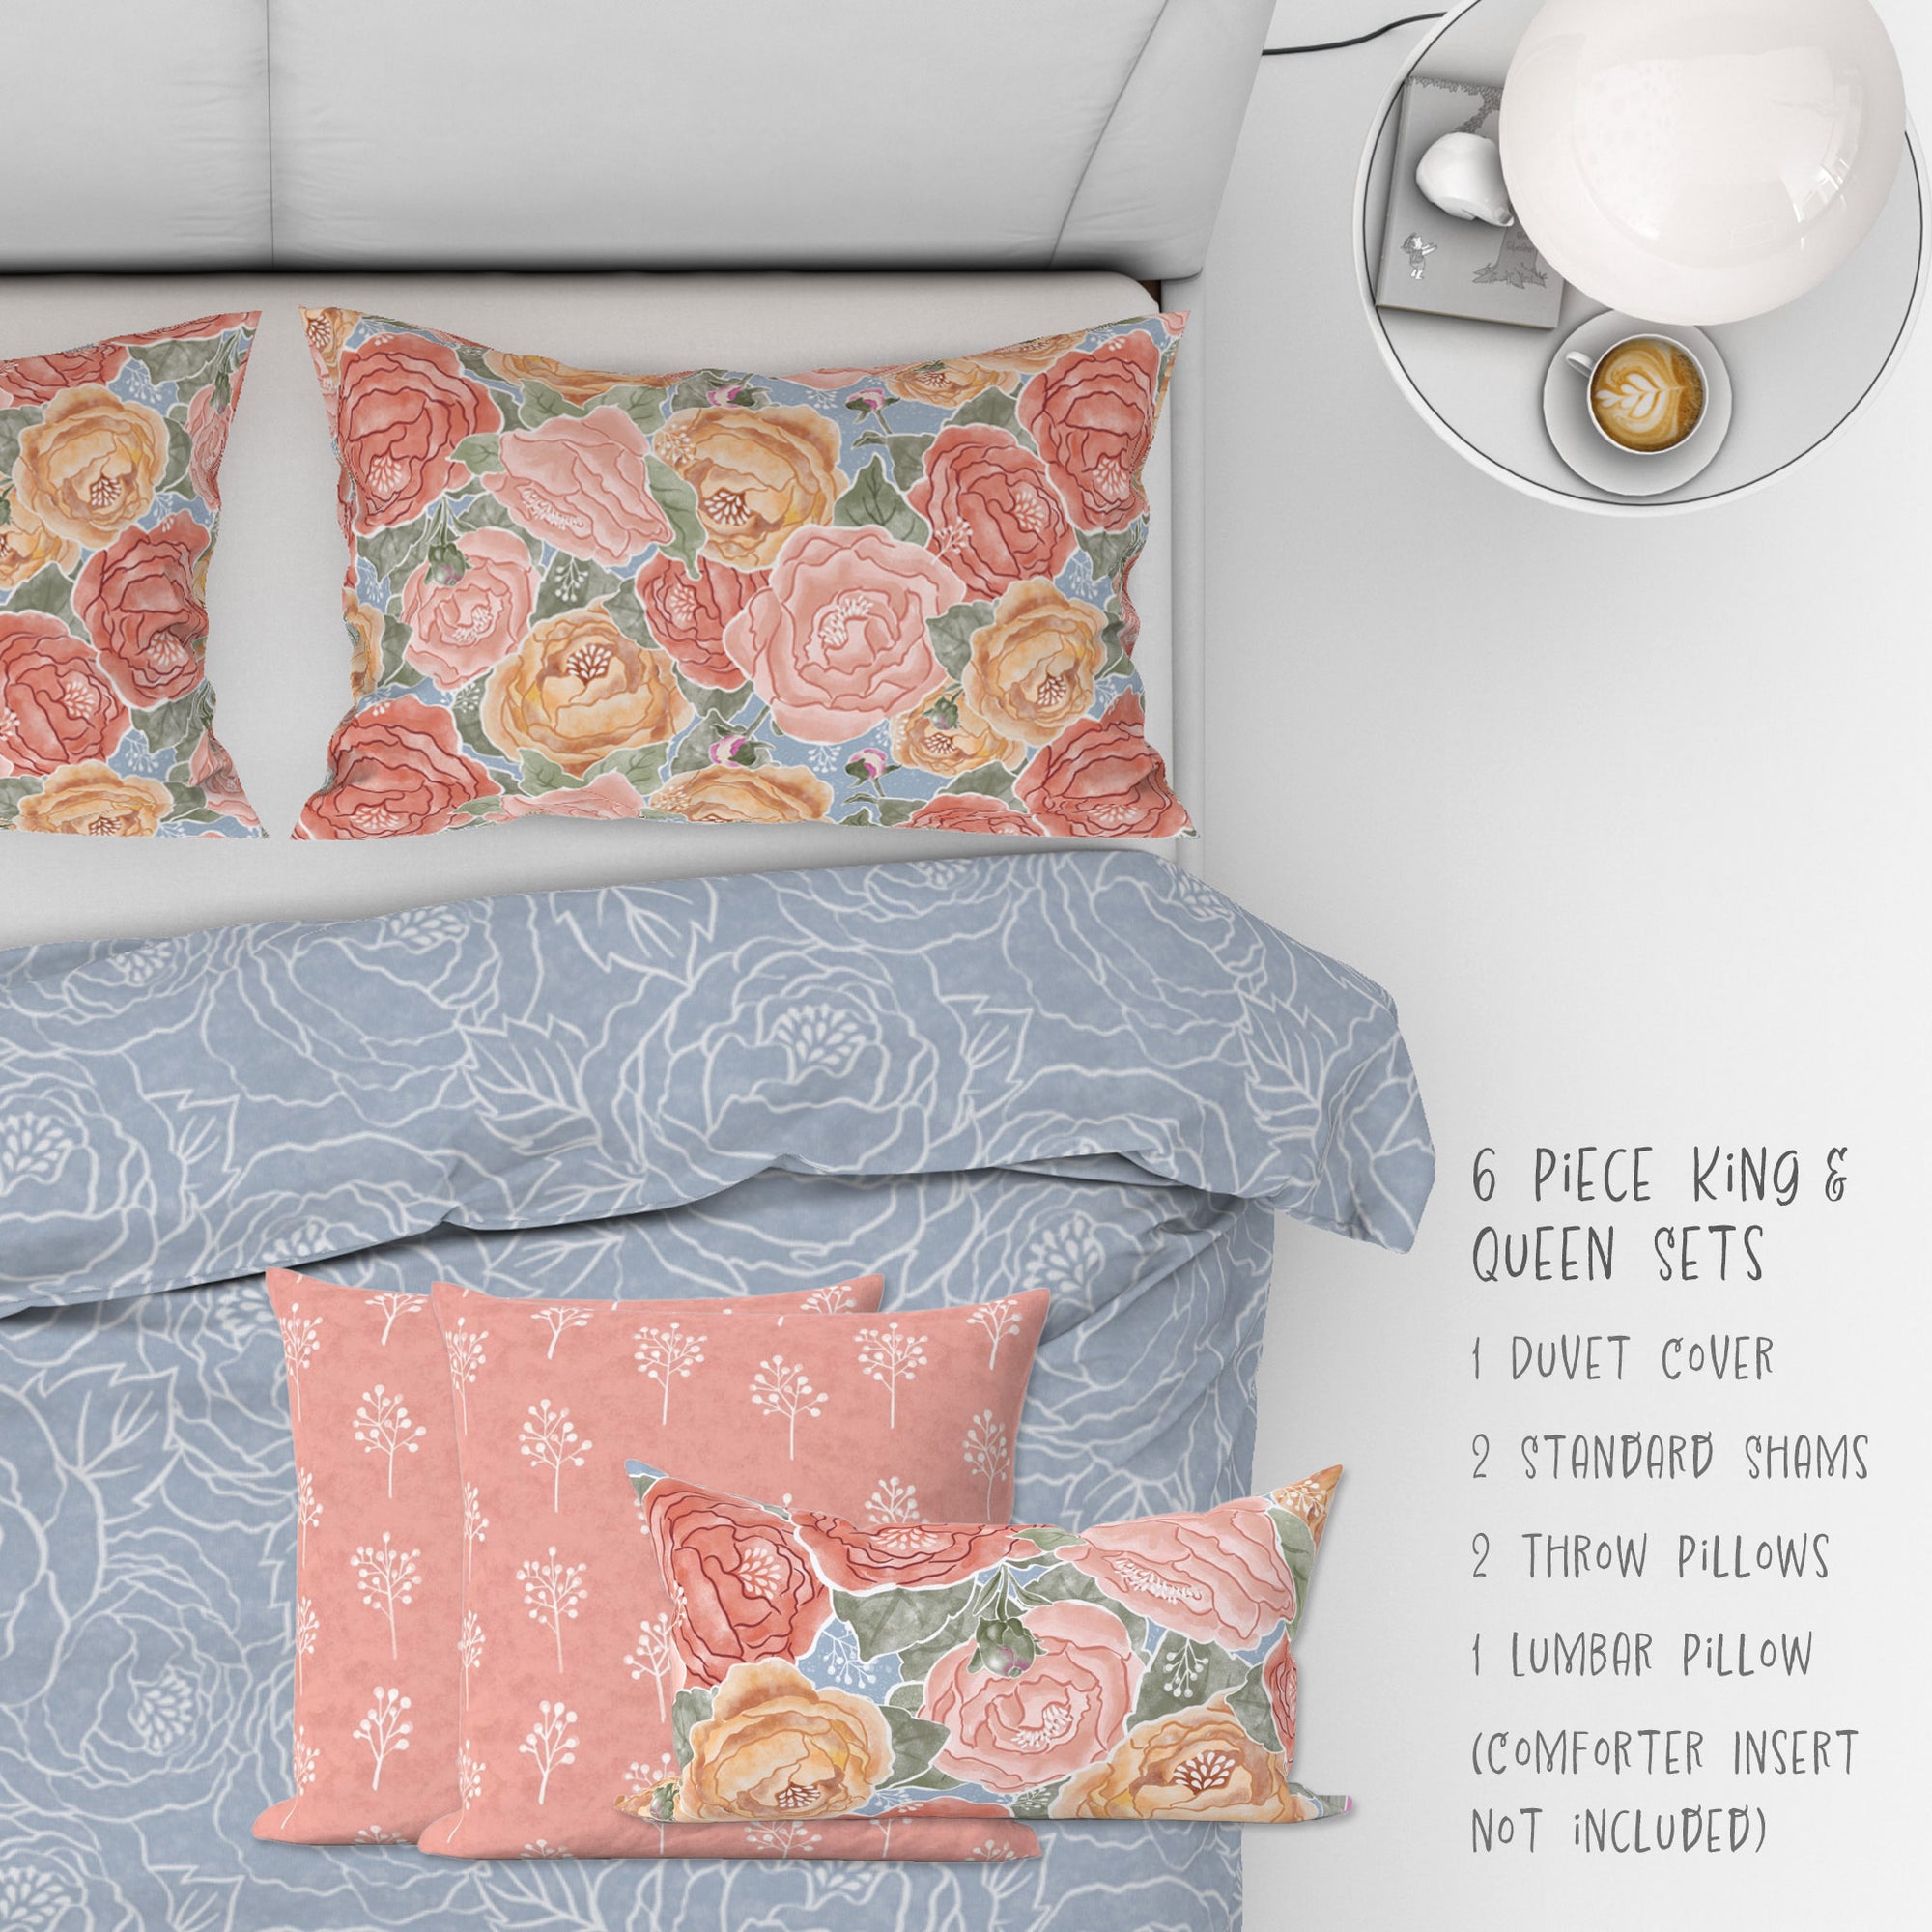 6 Piece Sets for Queen & King sizes - Pretty In Peony Line on Blue comes with Duvet cover, two Shams, 2 18” Throw Pillows and 1 Lumbar Pillow